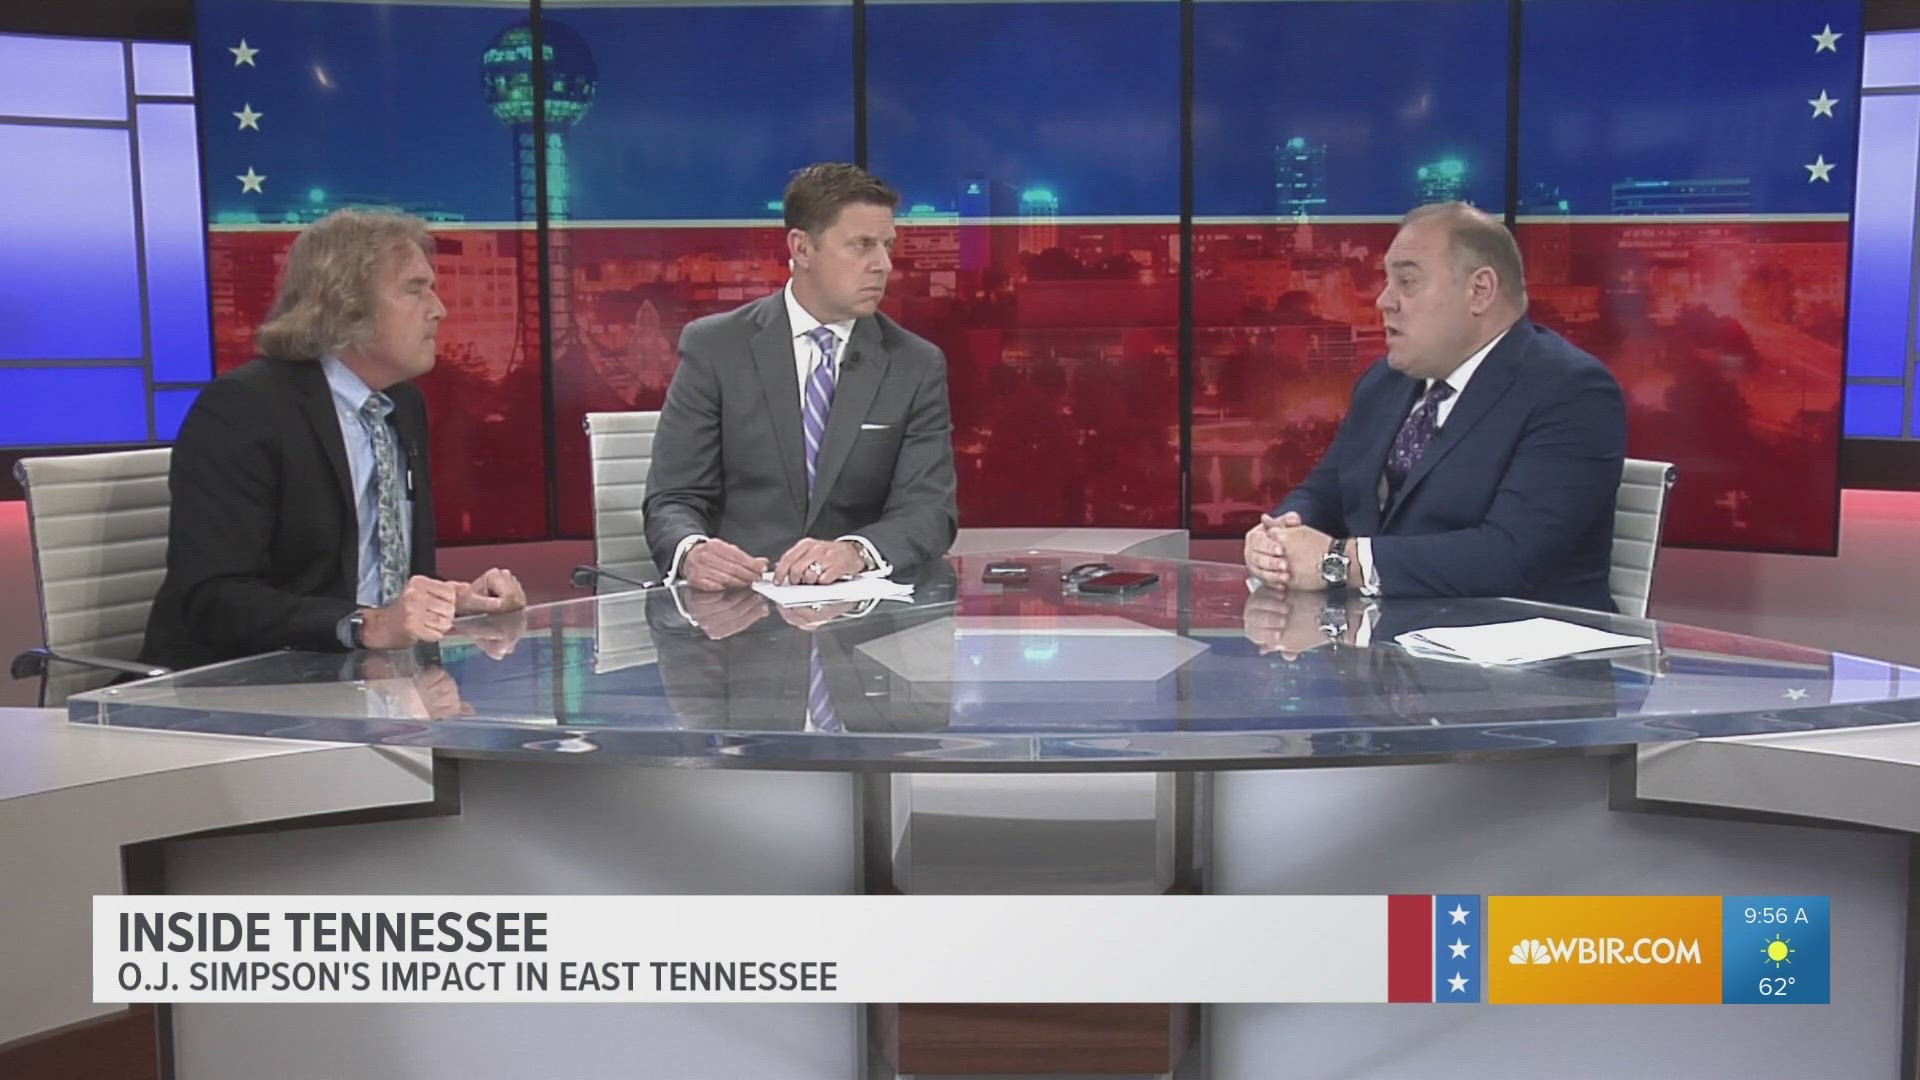 The Inside Tennessee panel discusses the impact O.J. Simpson had in East Tennessee, following his recent death.